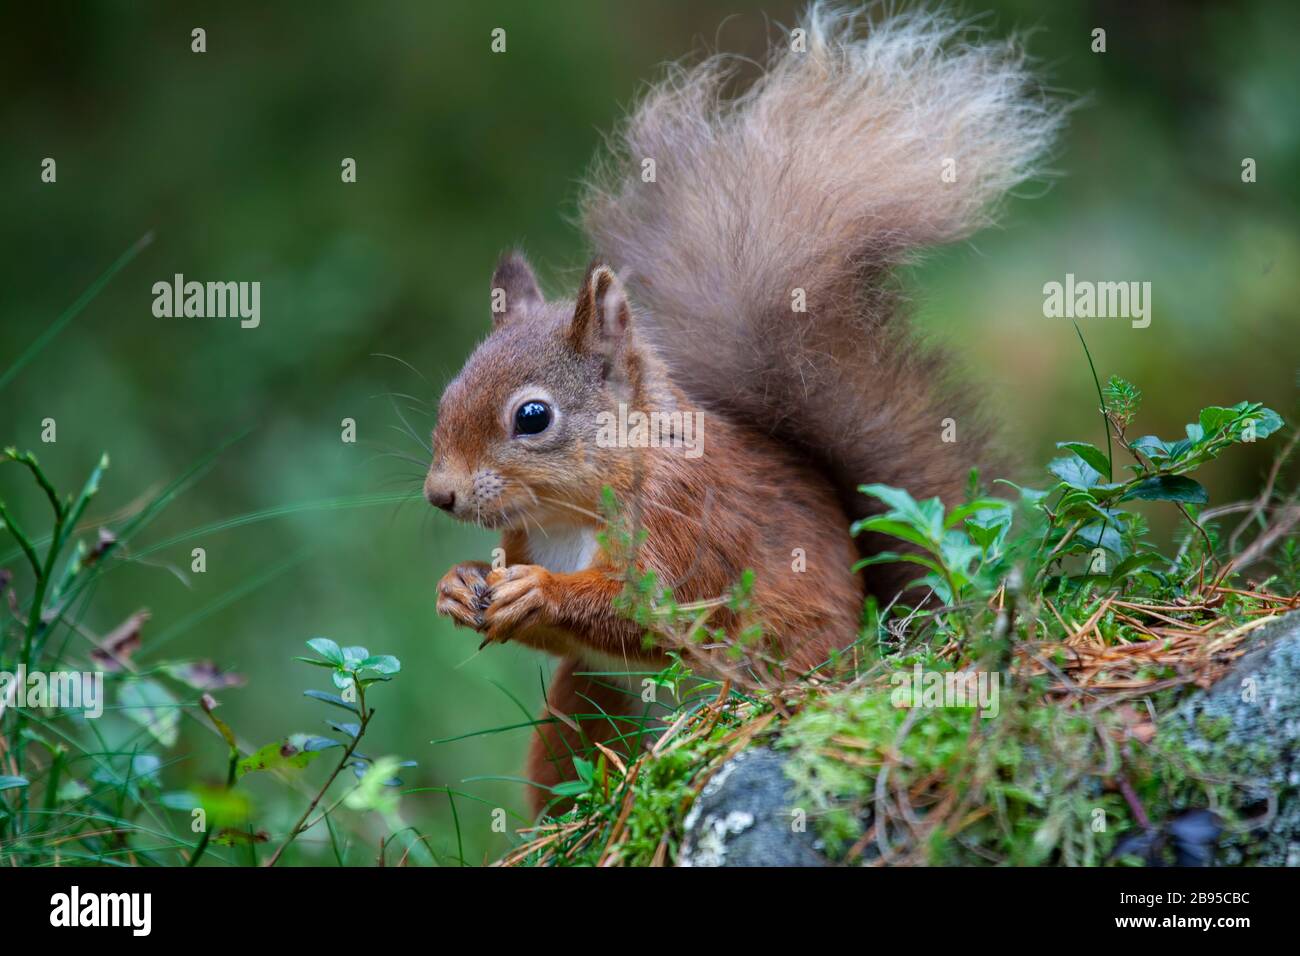 A close up of a red squirrel Sciurus vulgaris in the wilds of Scotland with a bushy tail and a hazel nut in its claws Stock Photo